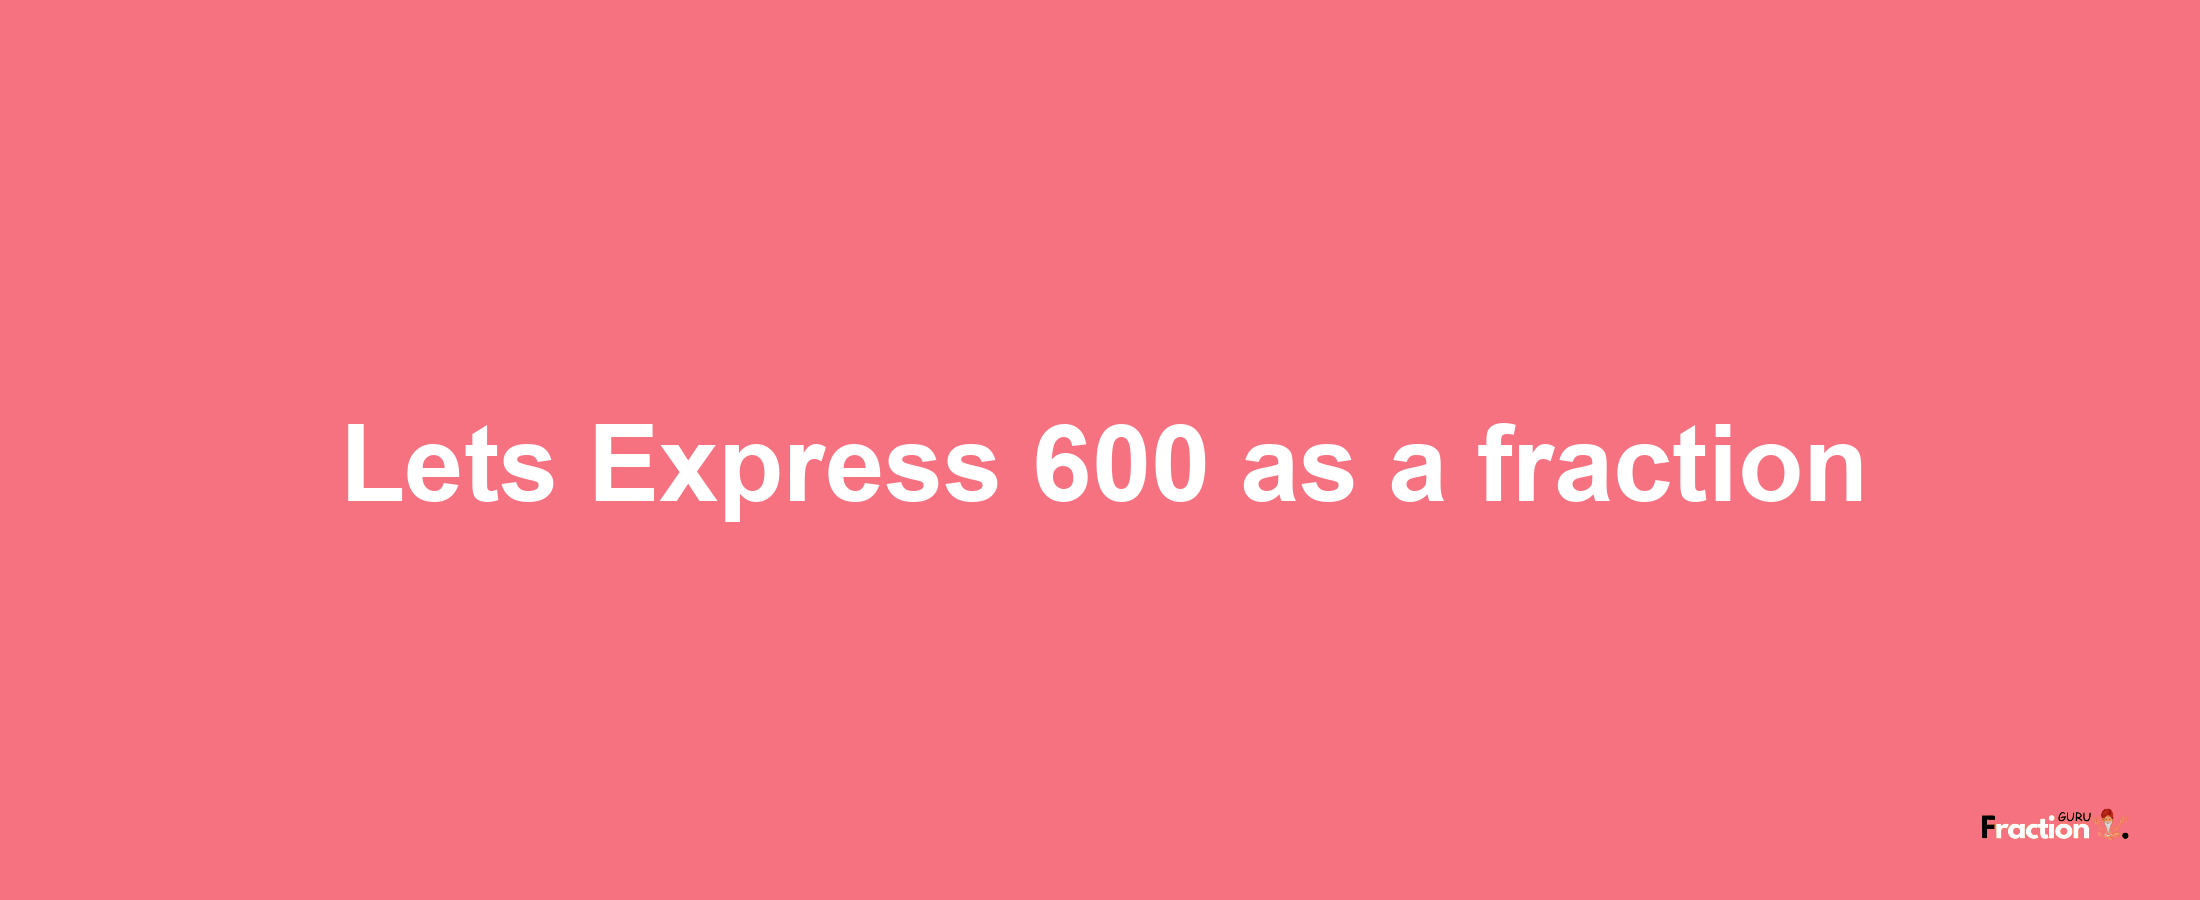 Lets Express 600 as afraction